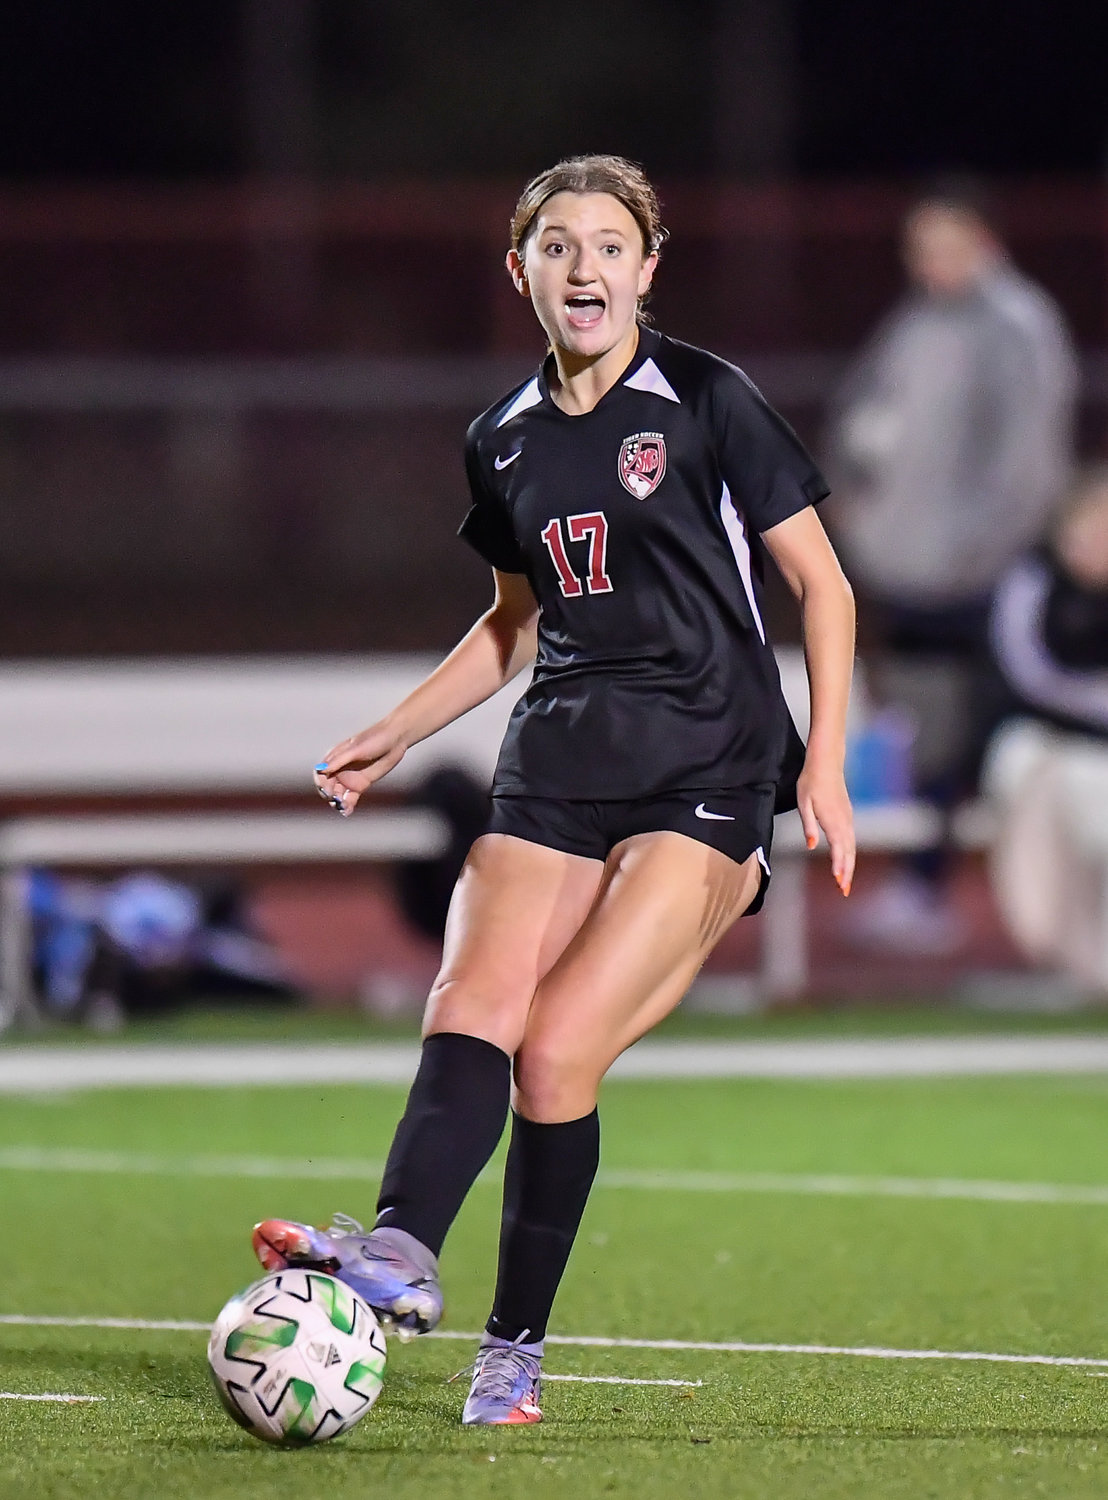 March 8, 2022: Katy's Kailey Adams #17 delivers the pass off during the Katy vs Katy Taylor soccer match at KHS. (Photo by Mark Goodman / Katy Times)